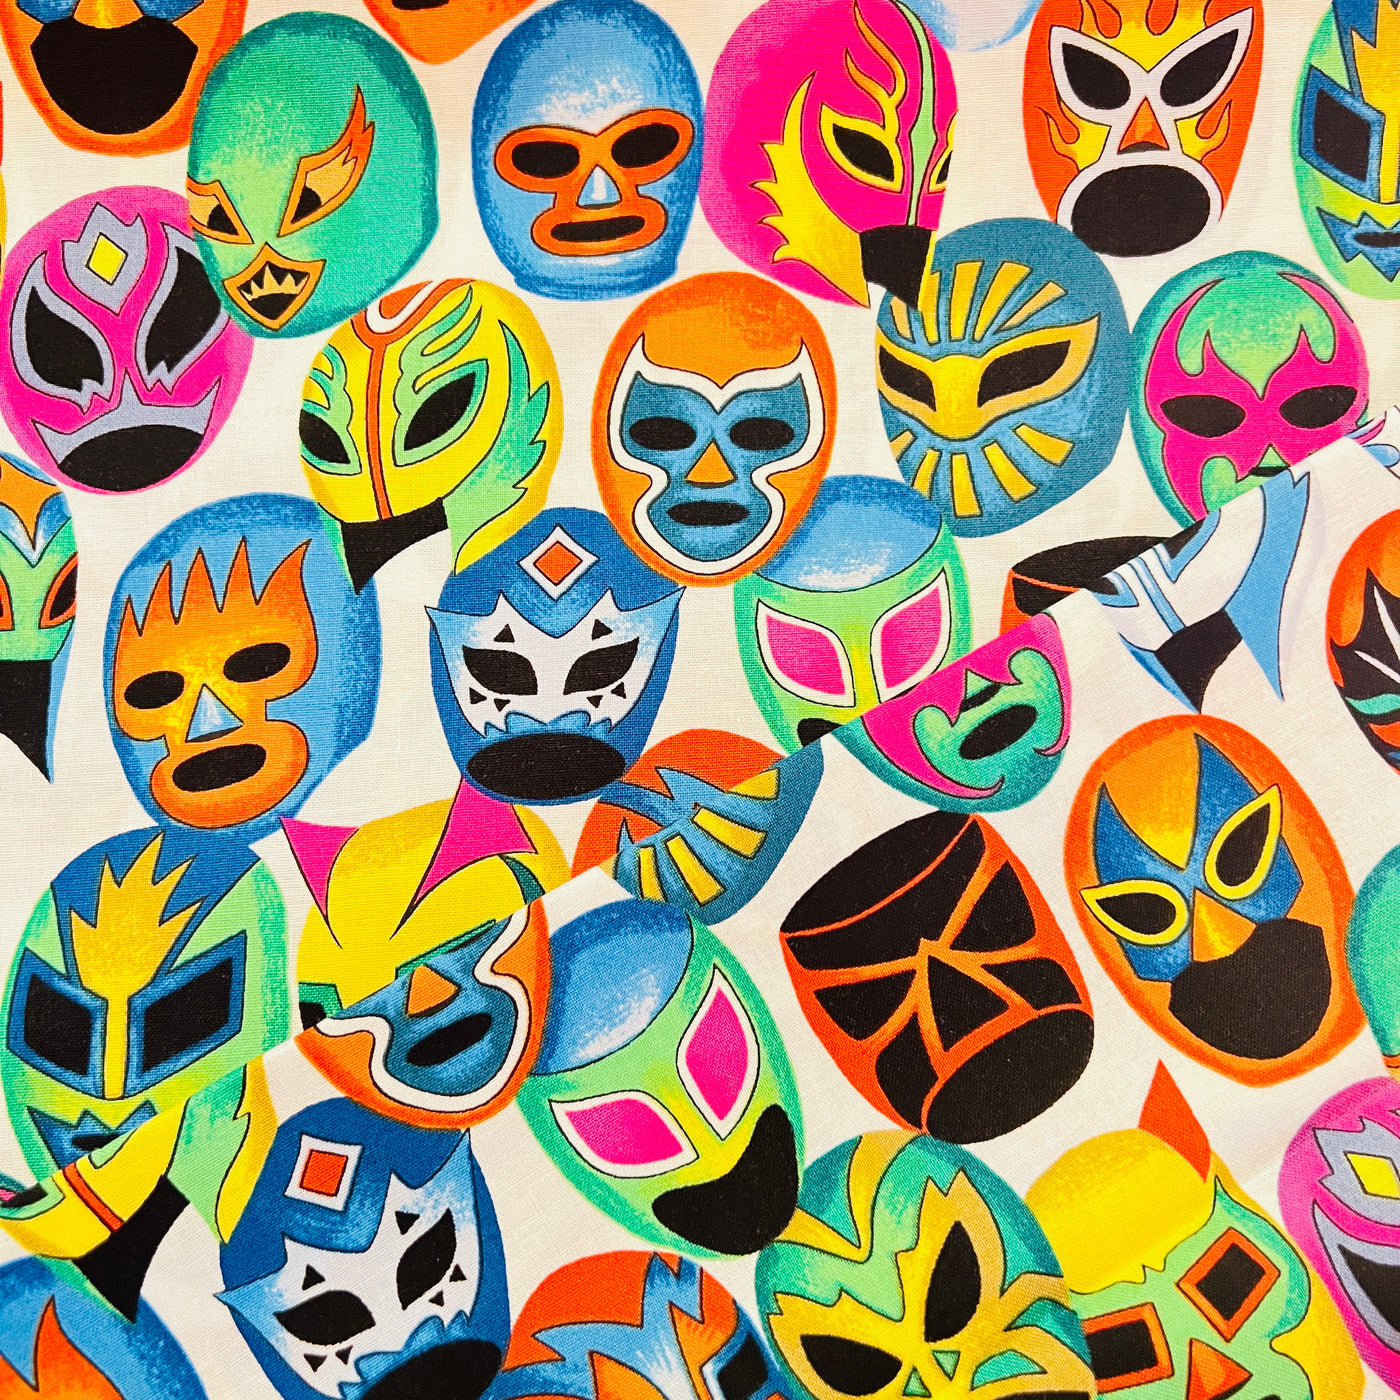 Fabric with a luchador mask pattern. All the masks are various designs and colors.